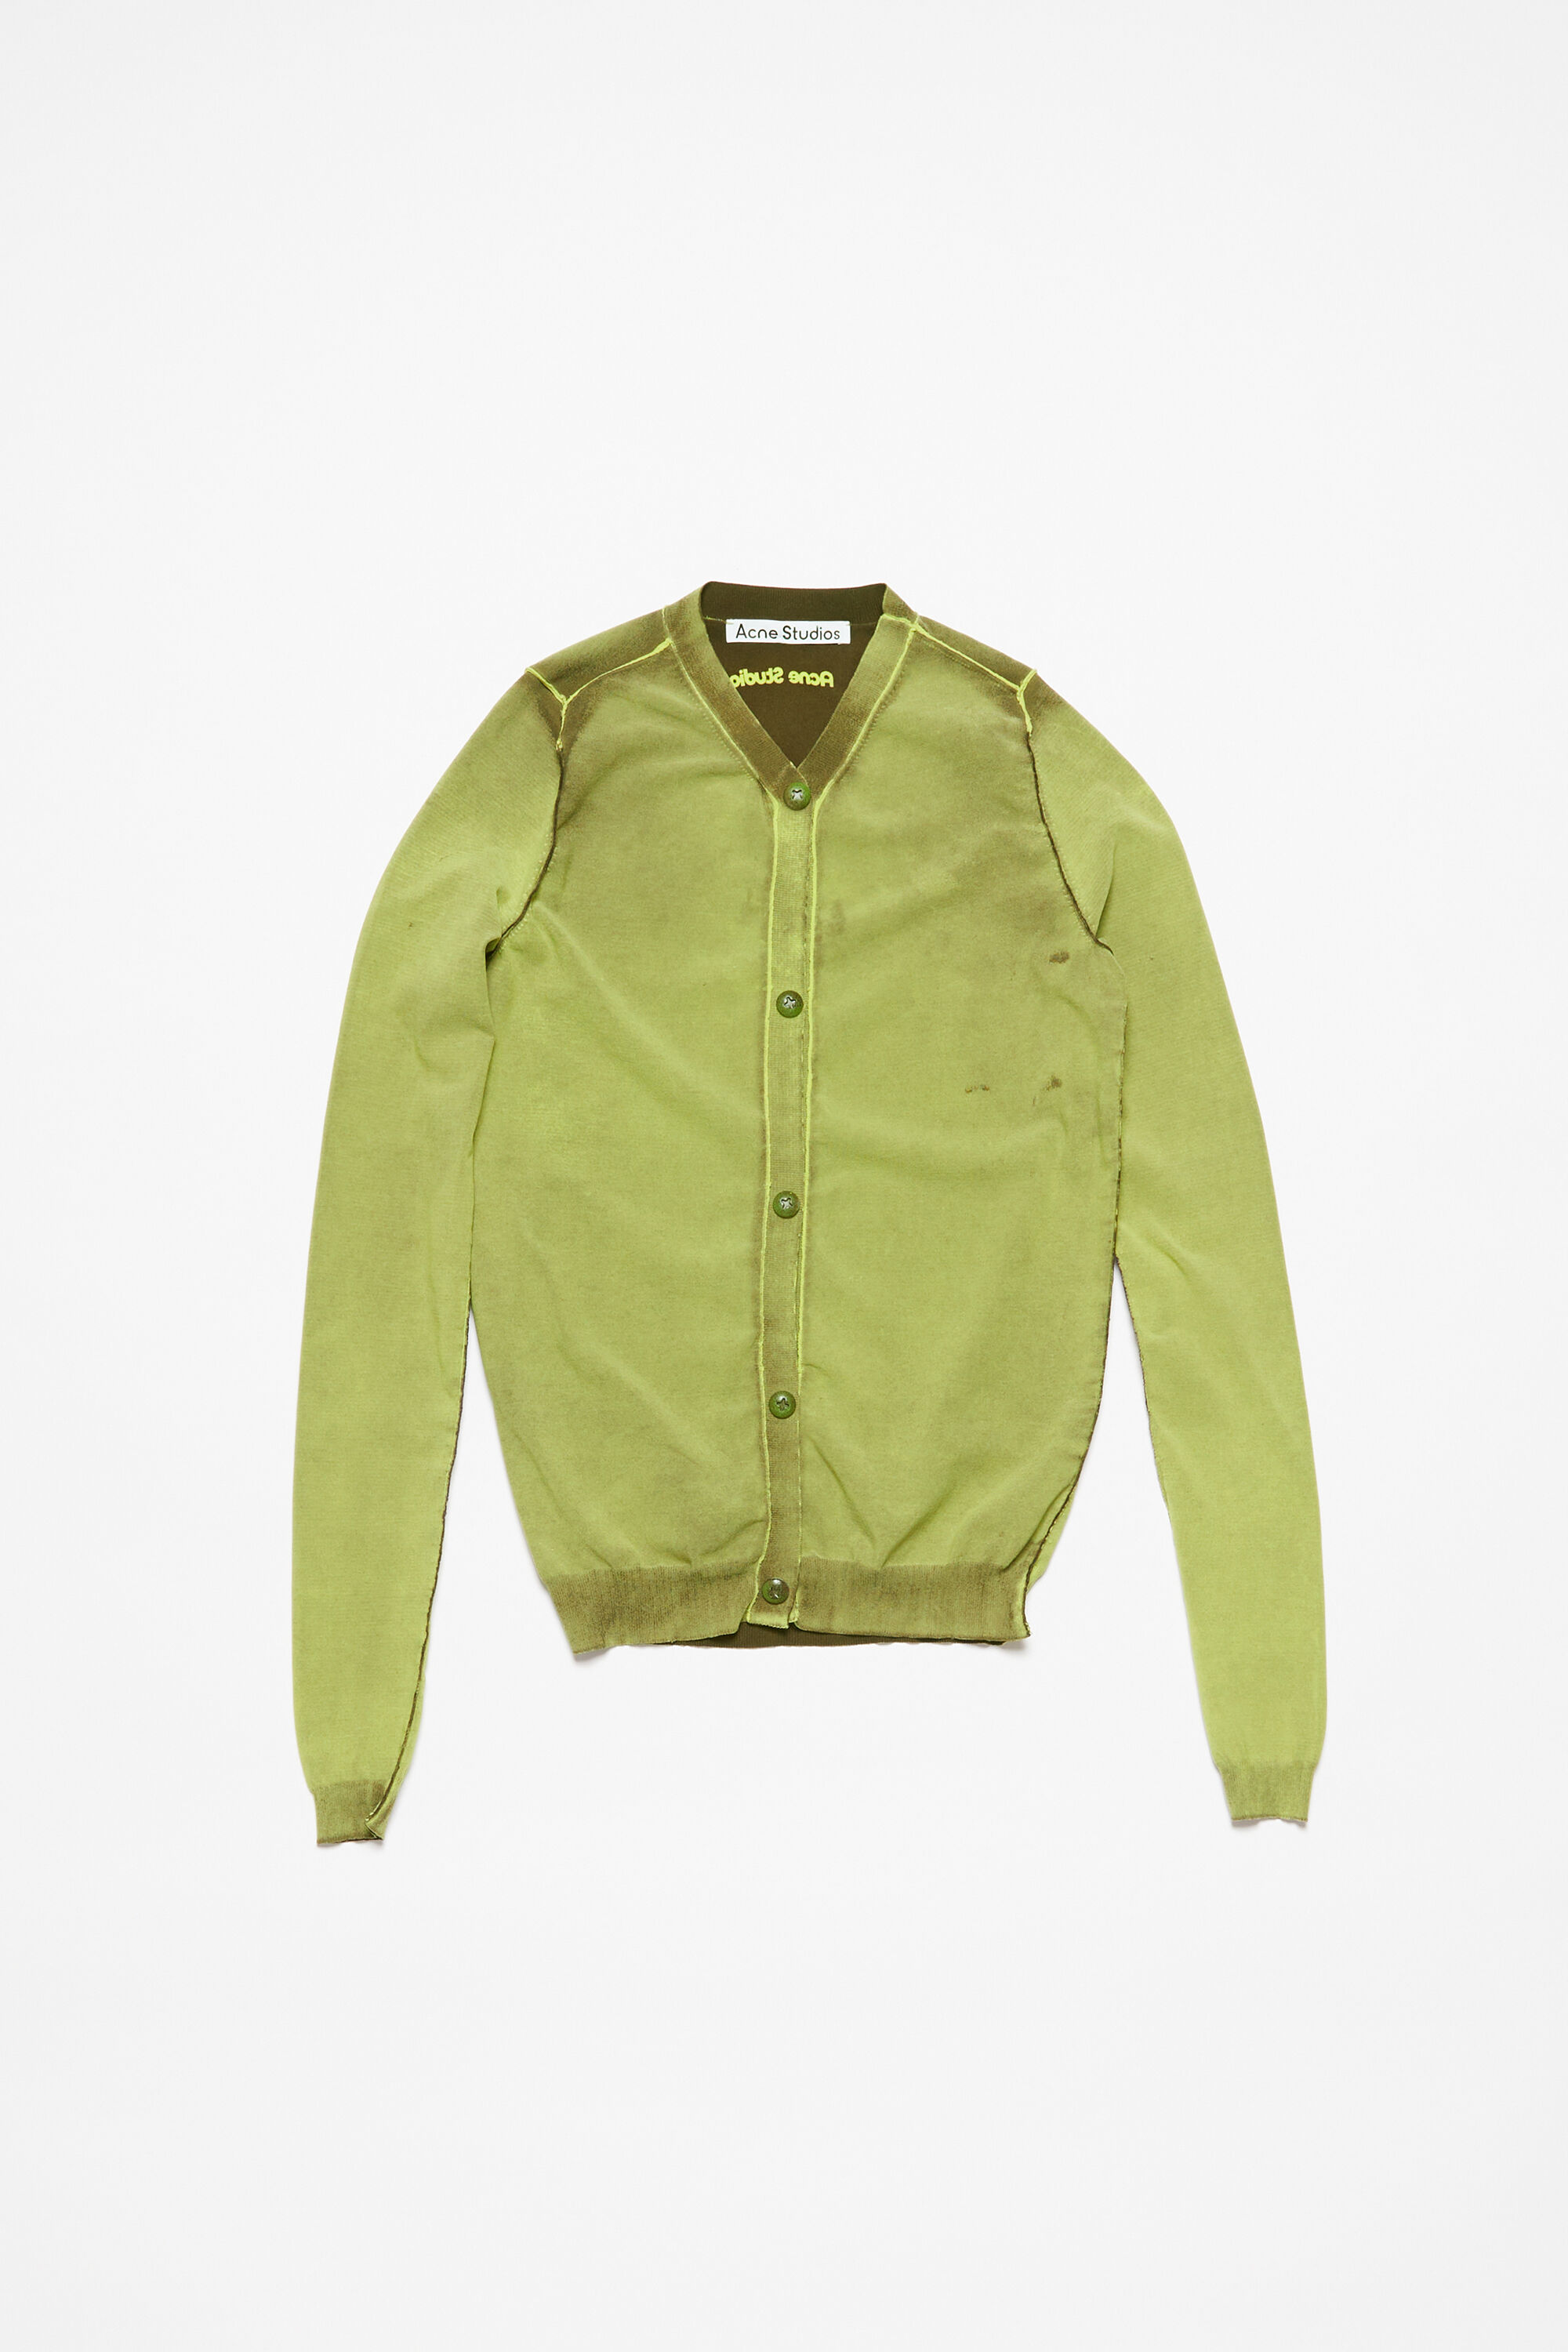 Acne Studios - Button-up cardigan - Lime green